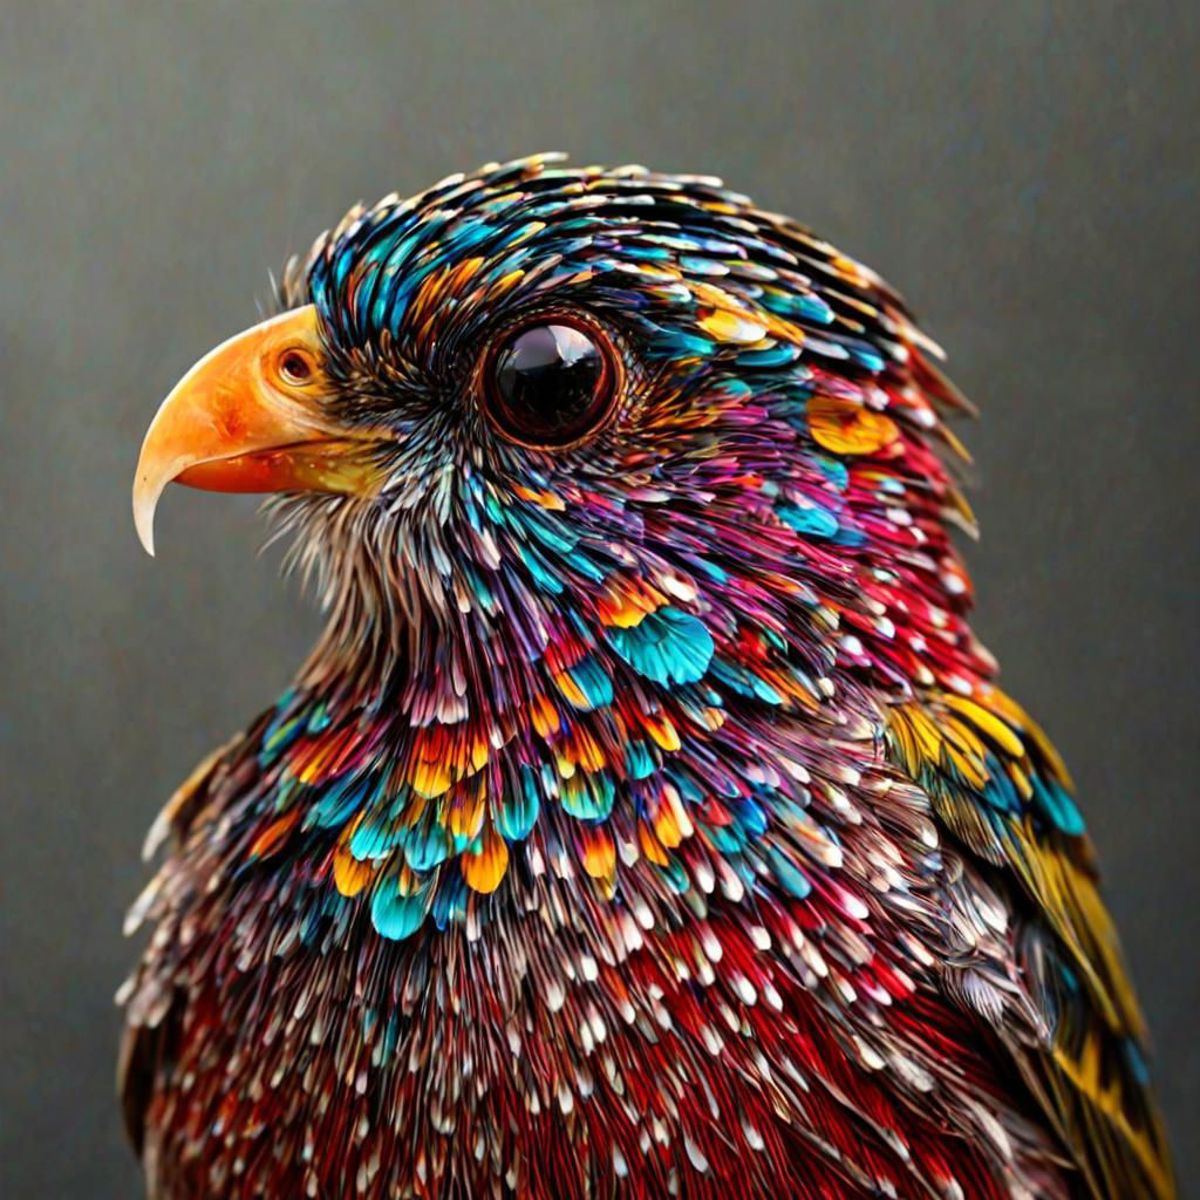 A colorful bird with a blue and red head and a yellow beak.